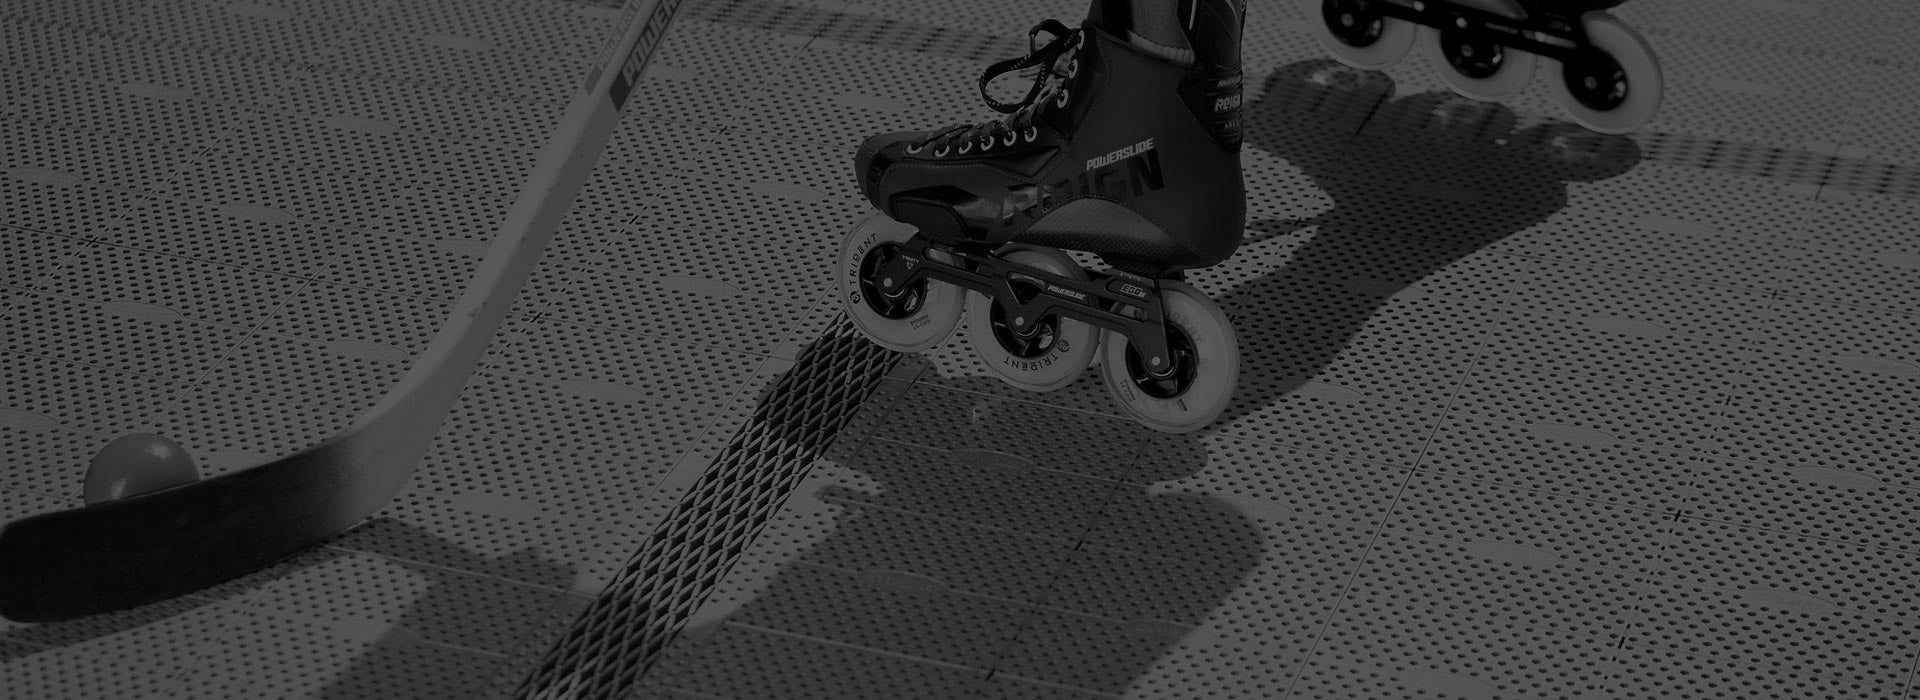 A black and white image of a hockey stick and 3-wheel Powerslide Reign inline roller hockey skates